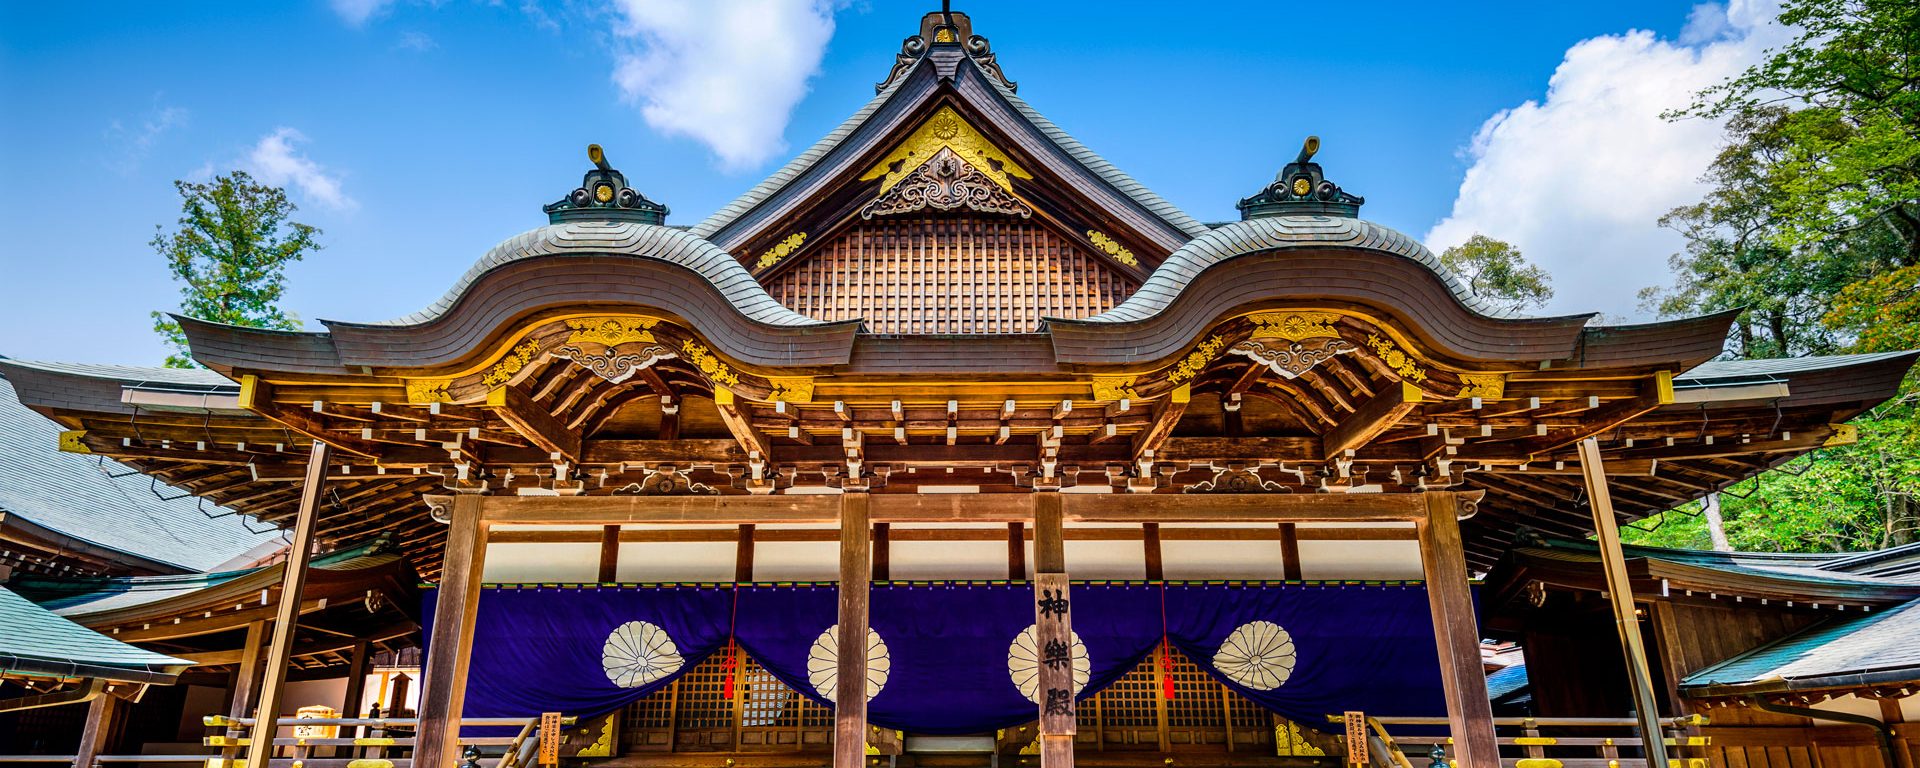 Intricate exterior of Ise Grand Shrine in Ise, Japan